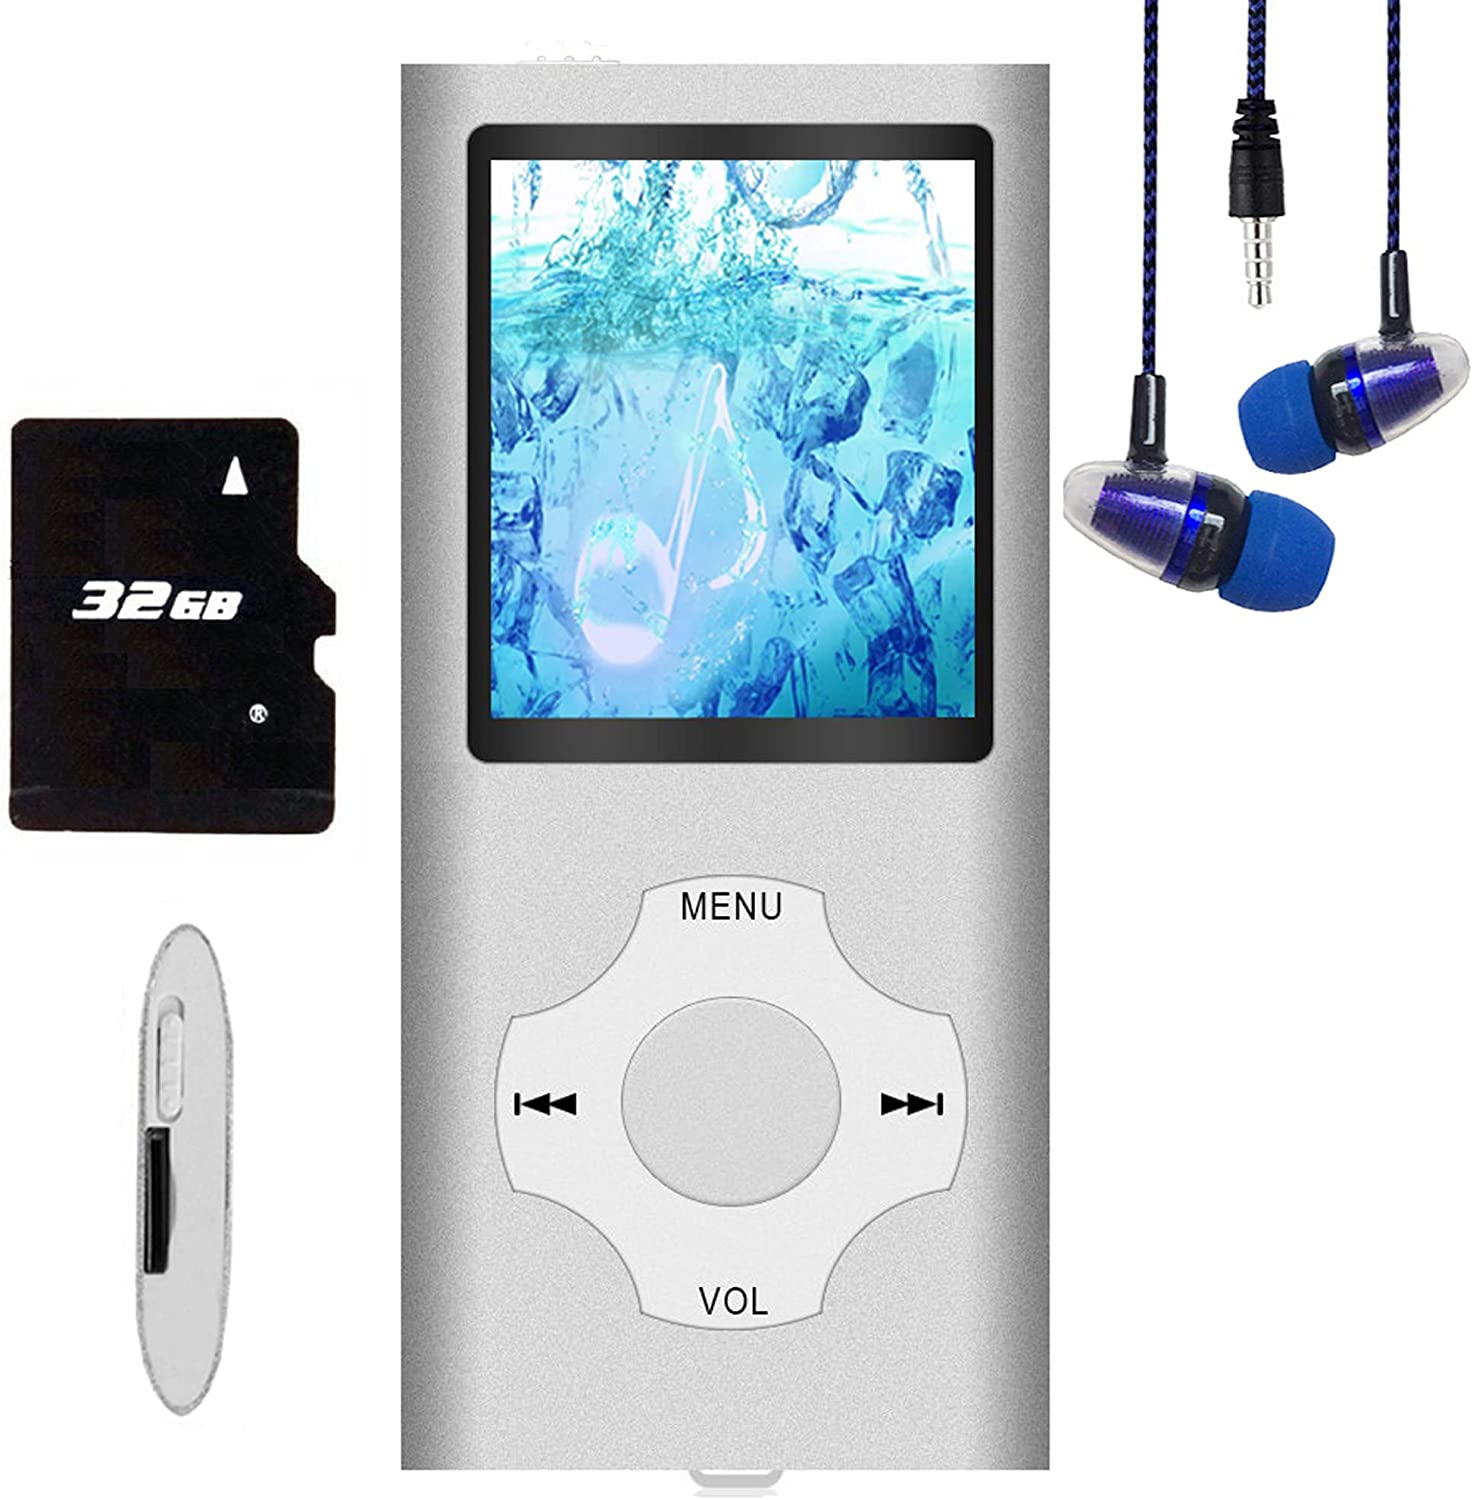 MP3 Player / MP4 Player, Hotechs MP3 Music Player with 8GB Memory SD Card Slim Classic Digital LCD 1.82'' Screen Mini USB Port with FM Radio, Voice Record,silver,F115545 - image 1 of 1